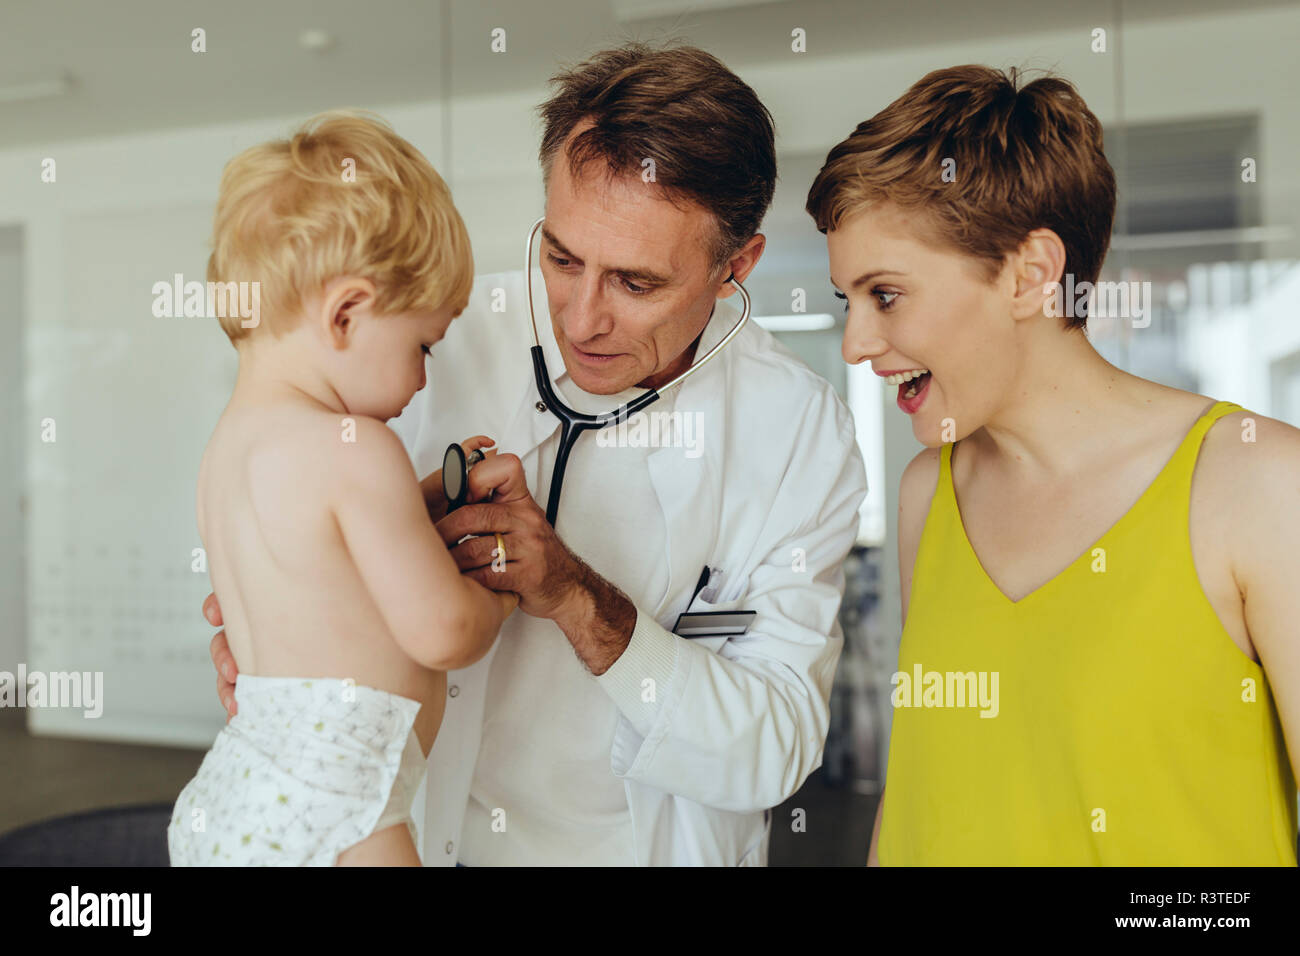 Pediatrician examining toddler with stethoscope, mother standing next to them Stock Photo